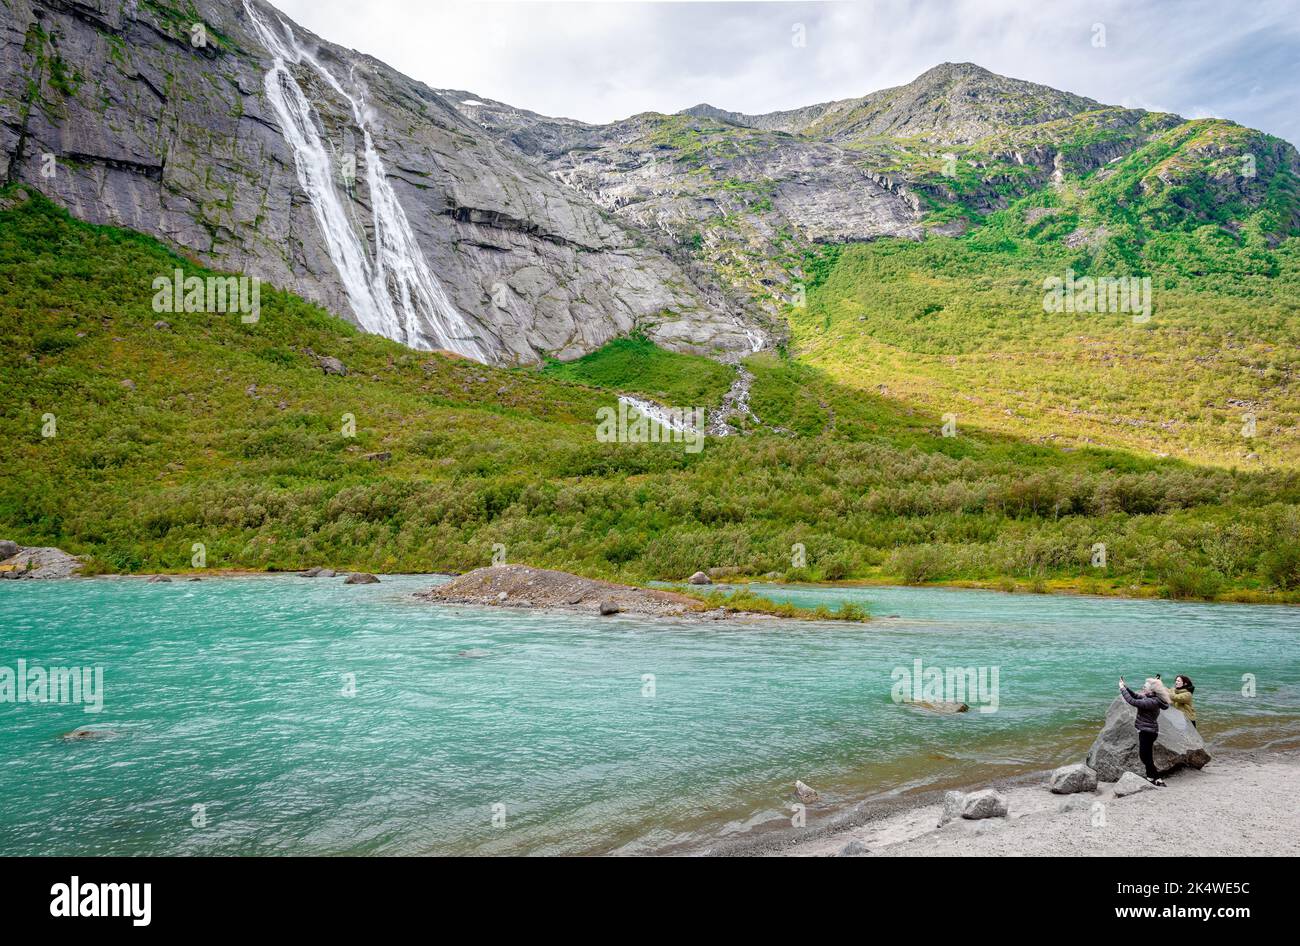 Briksdalen, Norway - August 22 2022: Women take photos of the magnificent Briksdalen valley, in Jostedalsbreen National Park, Norway. Scenic Norwegian Stock Photo